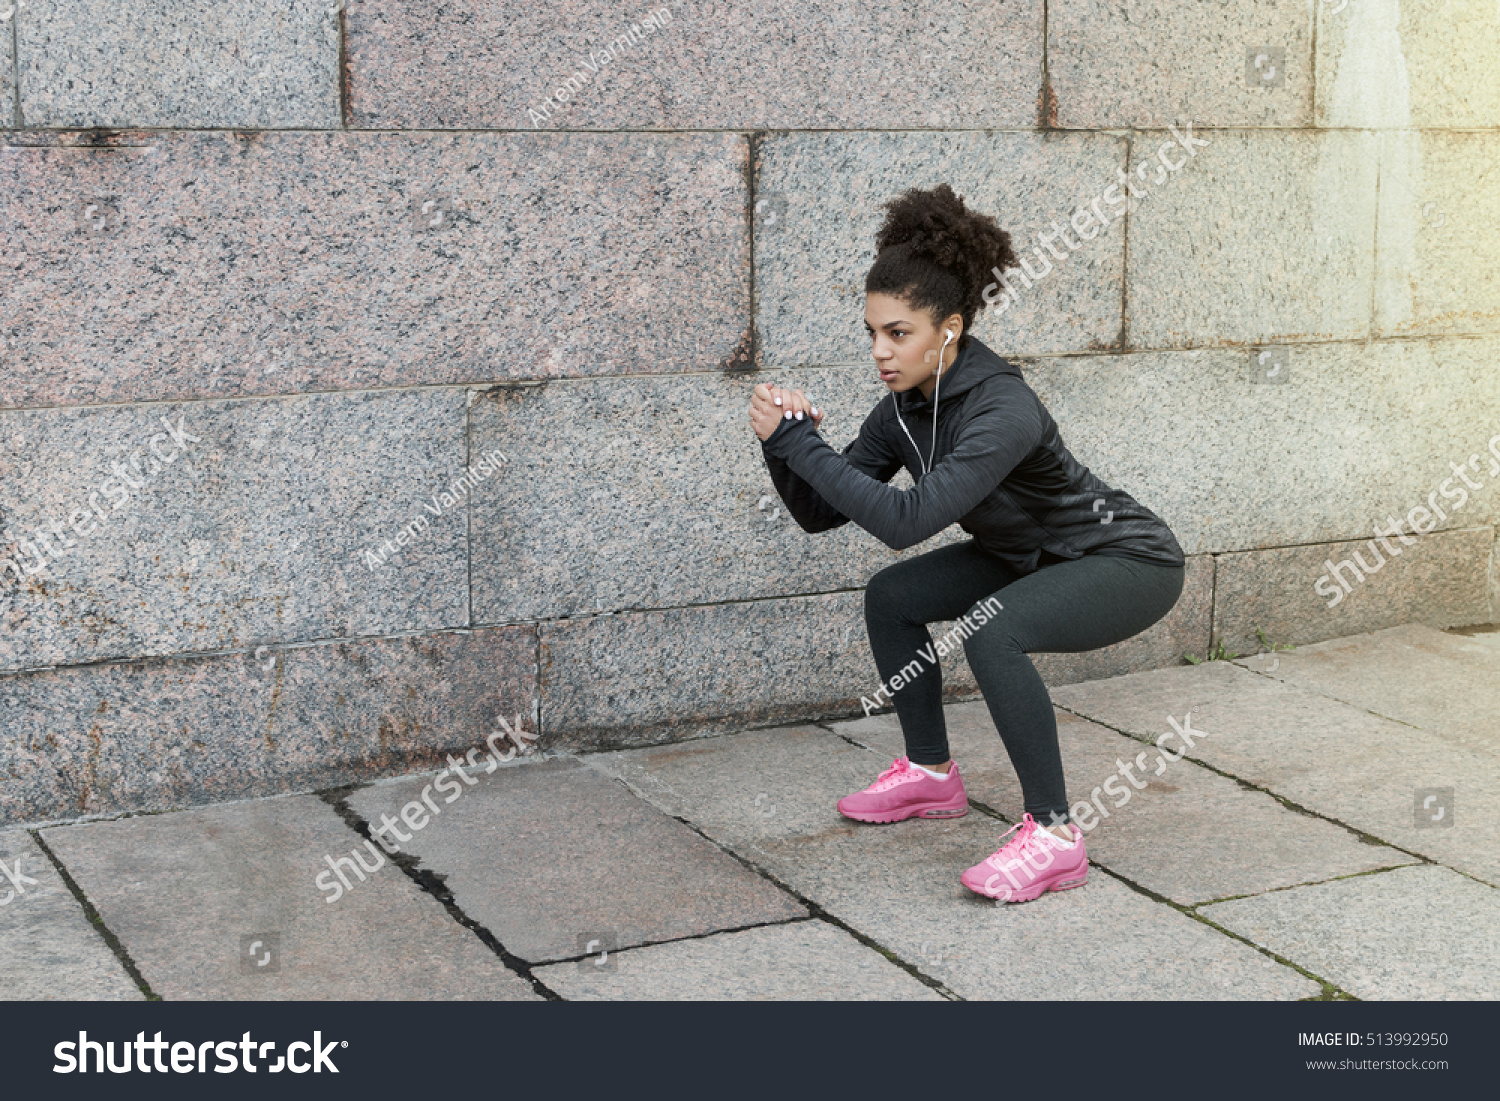 Sporty woman doing warm up squat, stretching near a wall #513992950